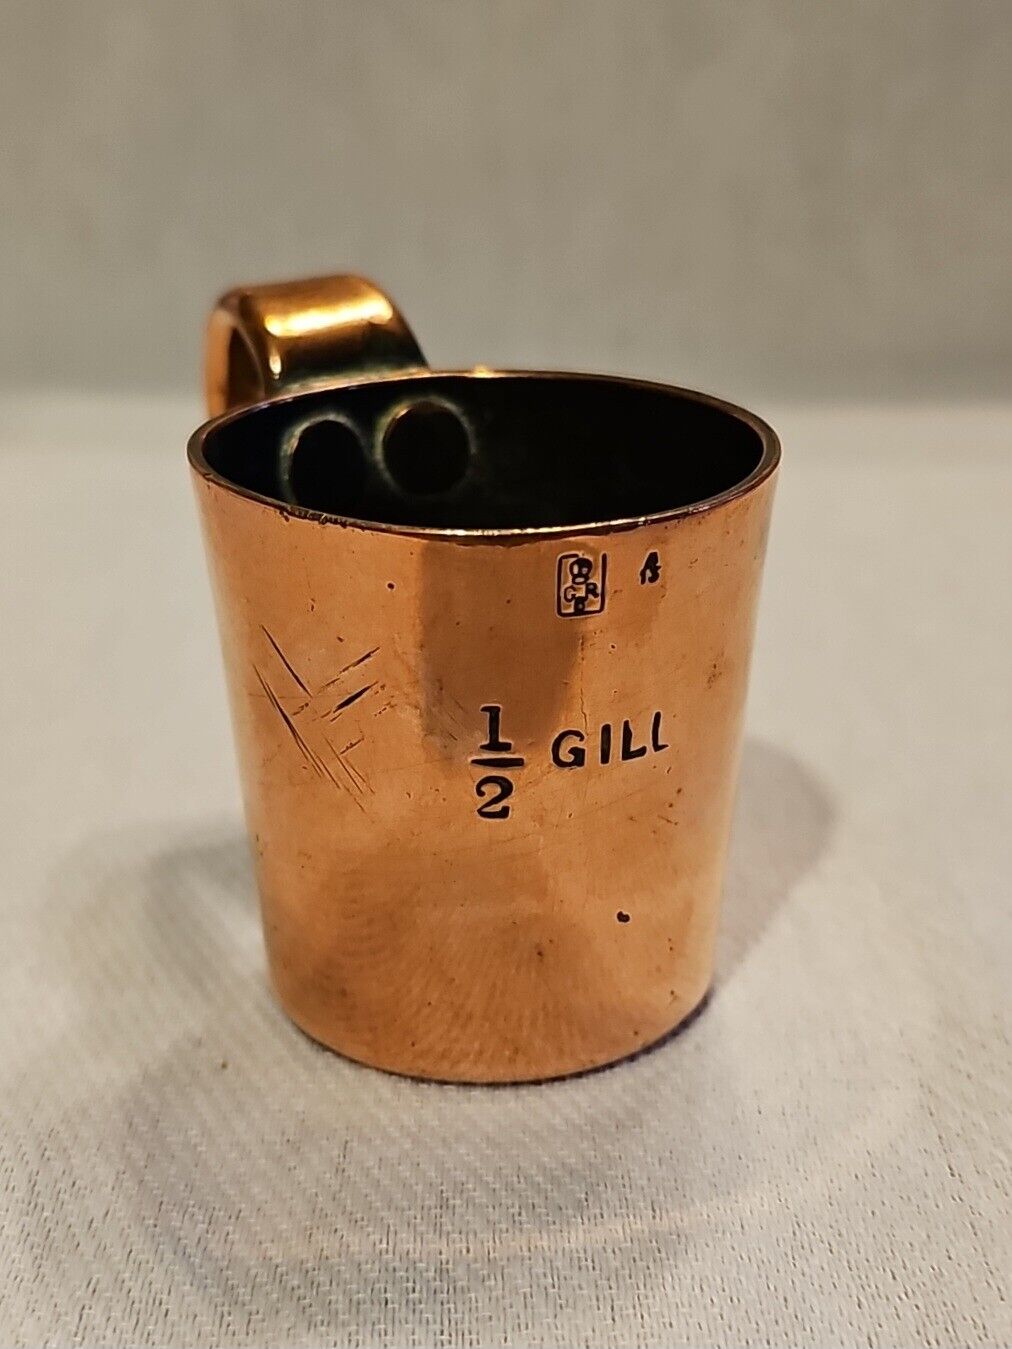 Antique Copper British Royal Navy 1/2 GILL cup